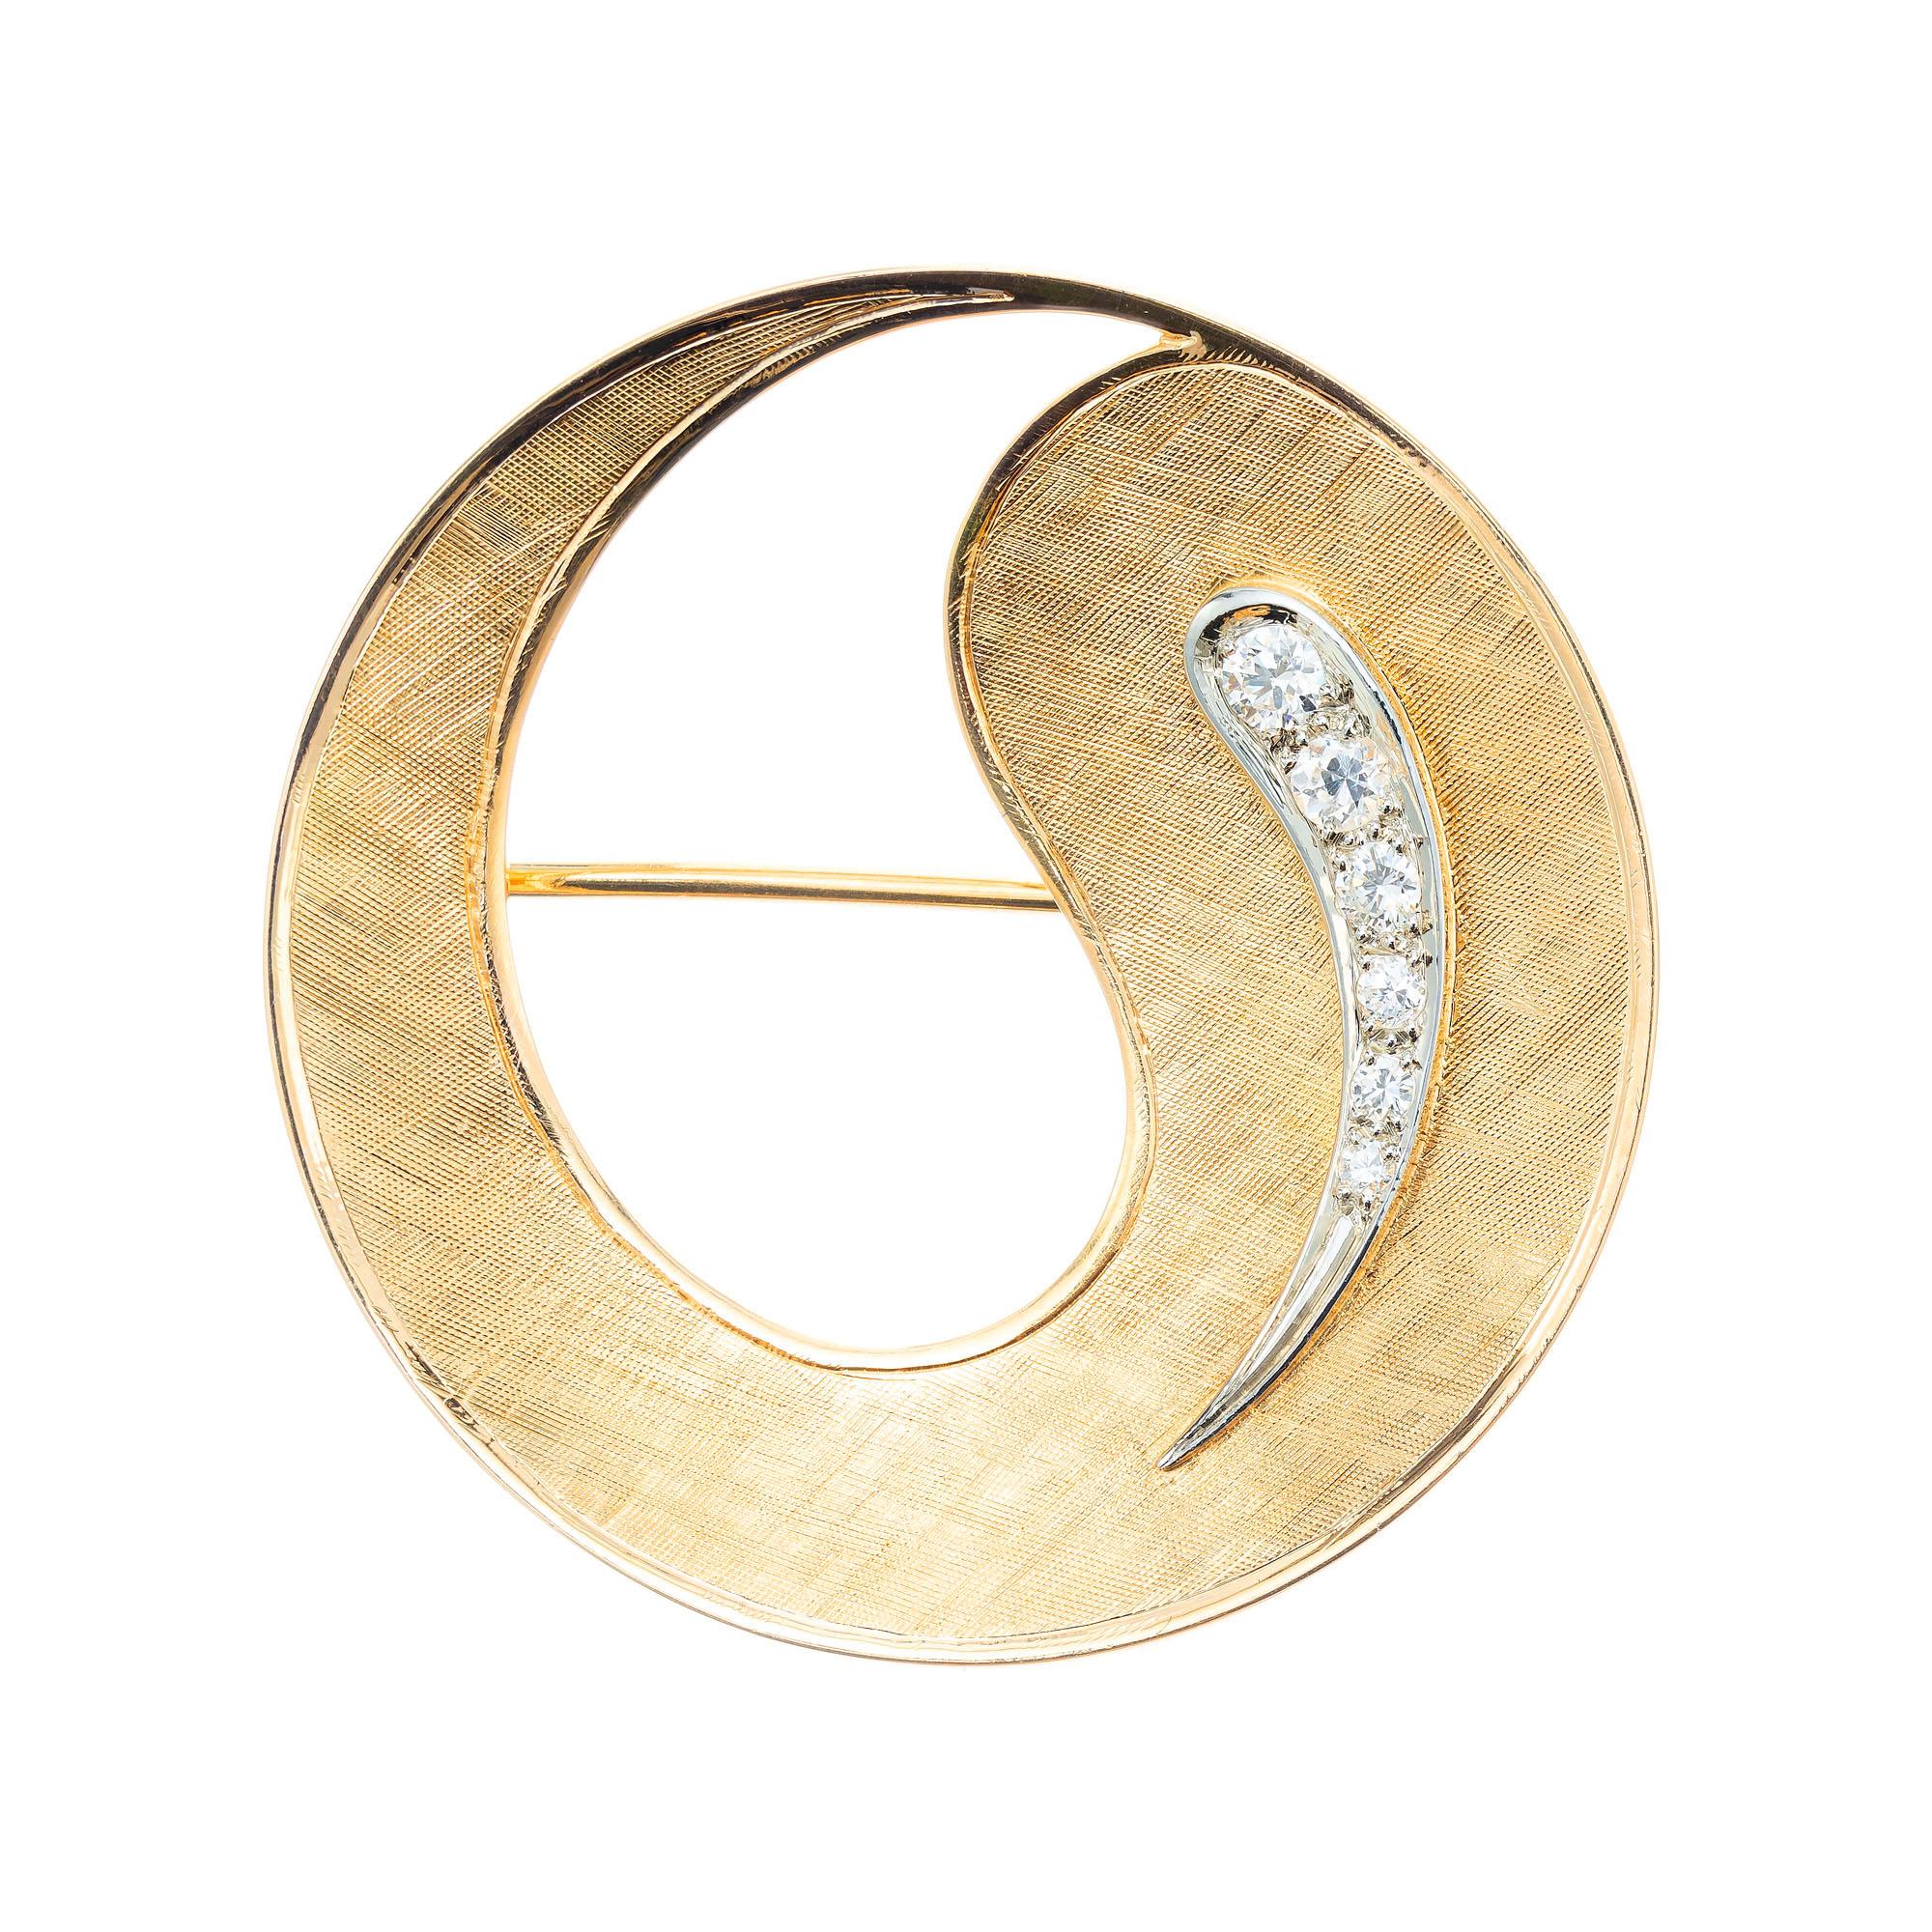 CB Ying Yang .30 Carat Diamond Yellow gold Brooch In Good Condition For Sale In Stamford, CT